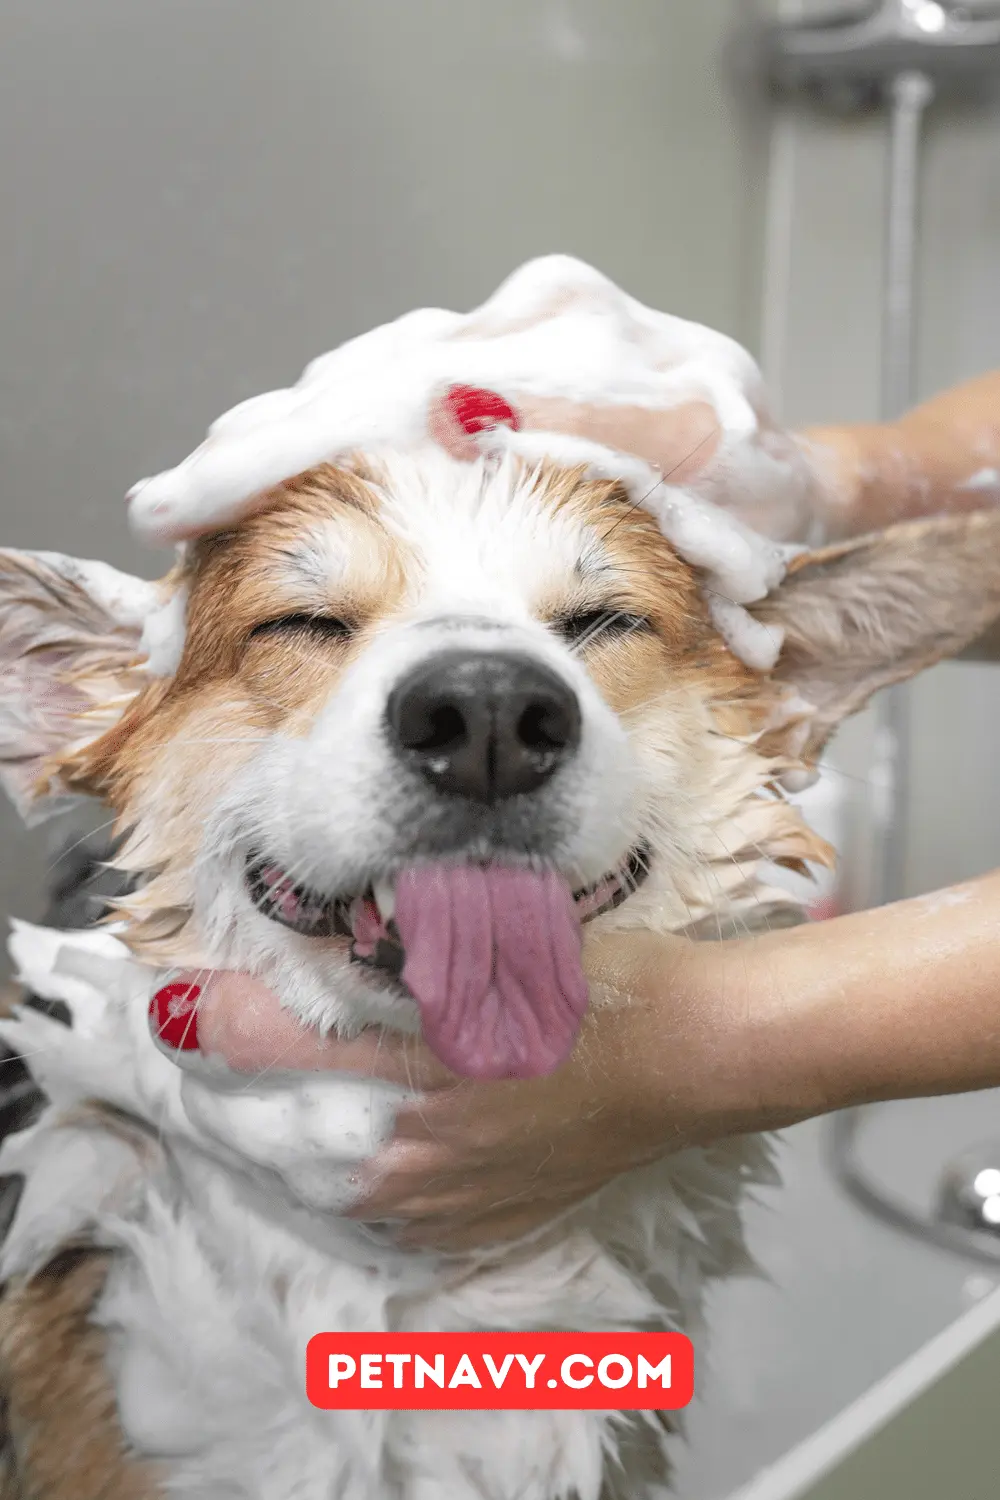 Dog Shampoo Recall What Every Pet Owner Needs to Know